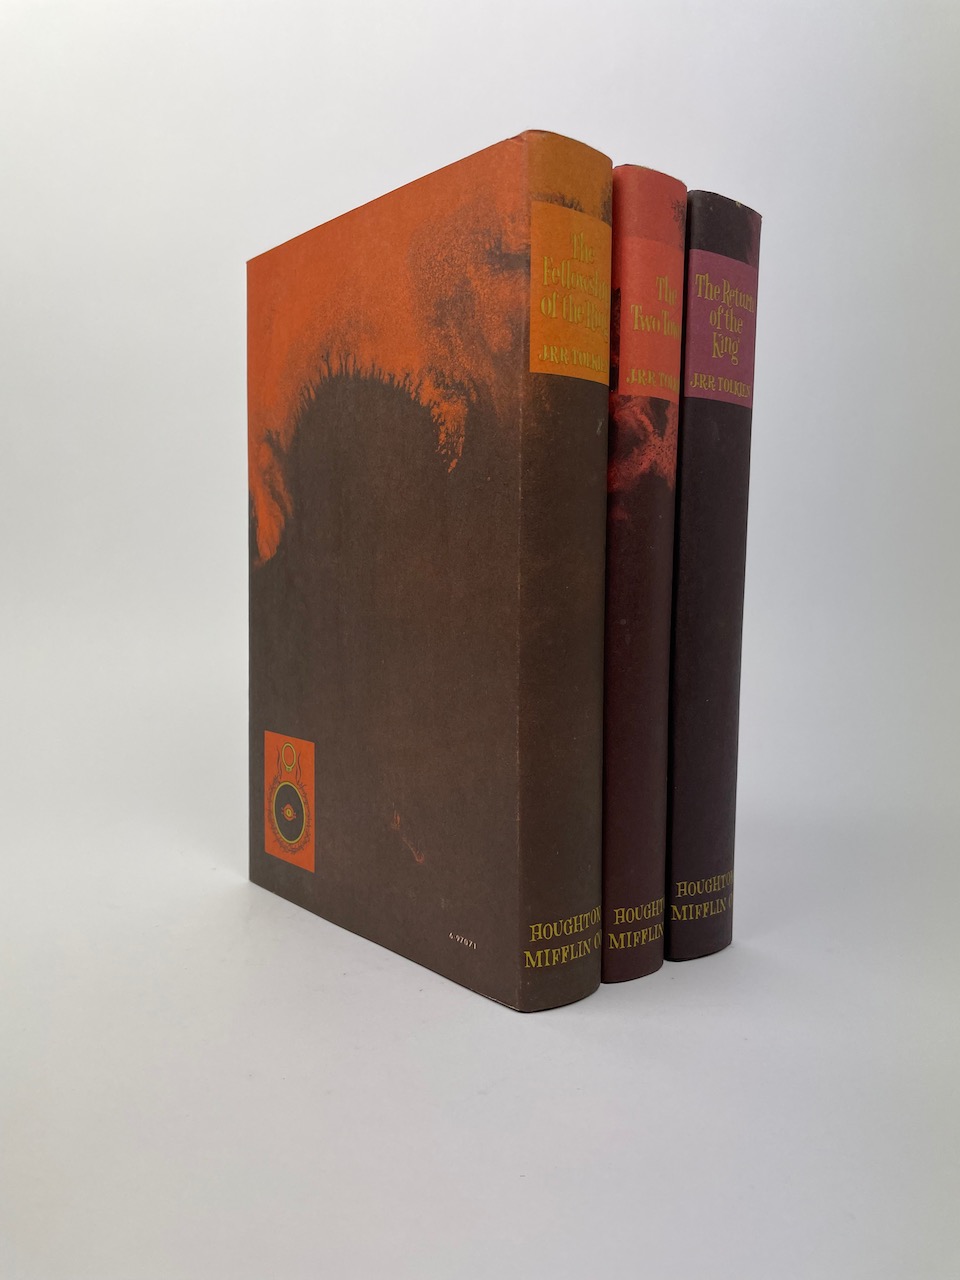 Lord of the Rings, 2nd US Edition in Original Publishers Slipcase and with Dustjackets 11